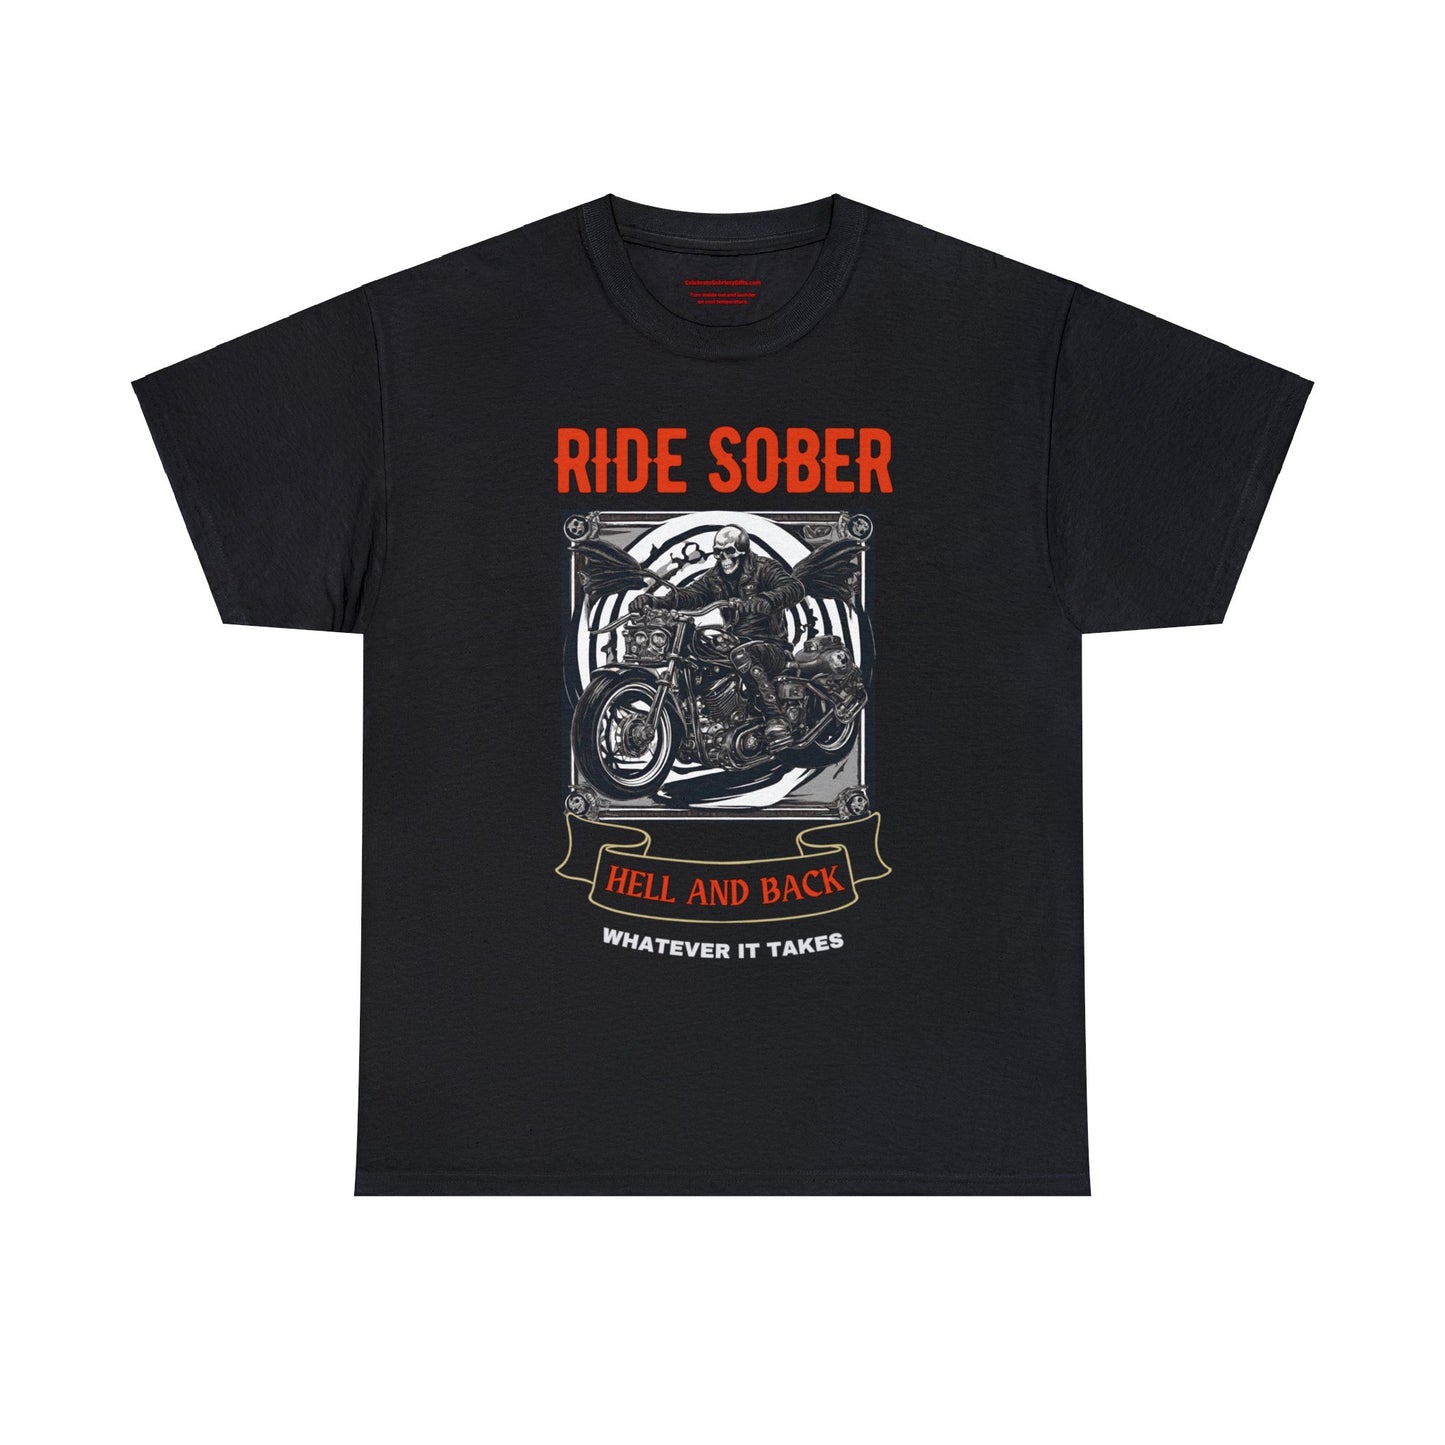 "Ride Sober - Hell And Back" Two-Sided Unisex Tee